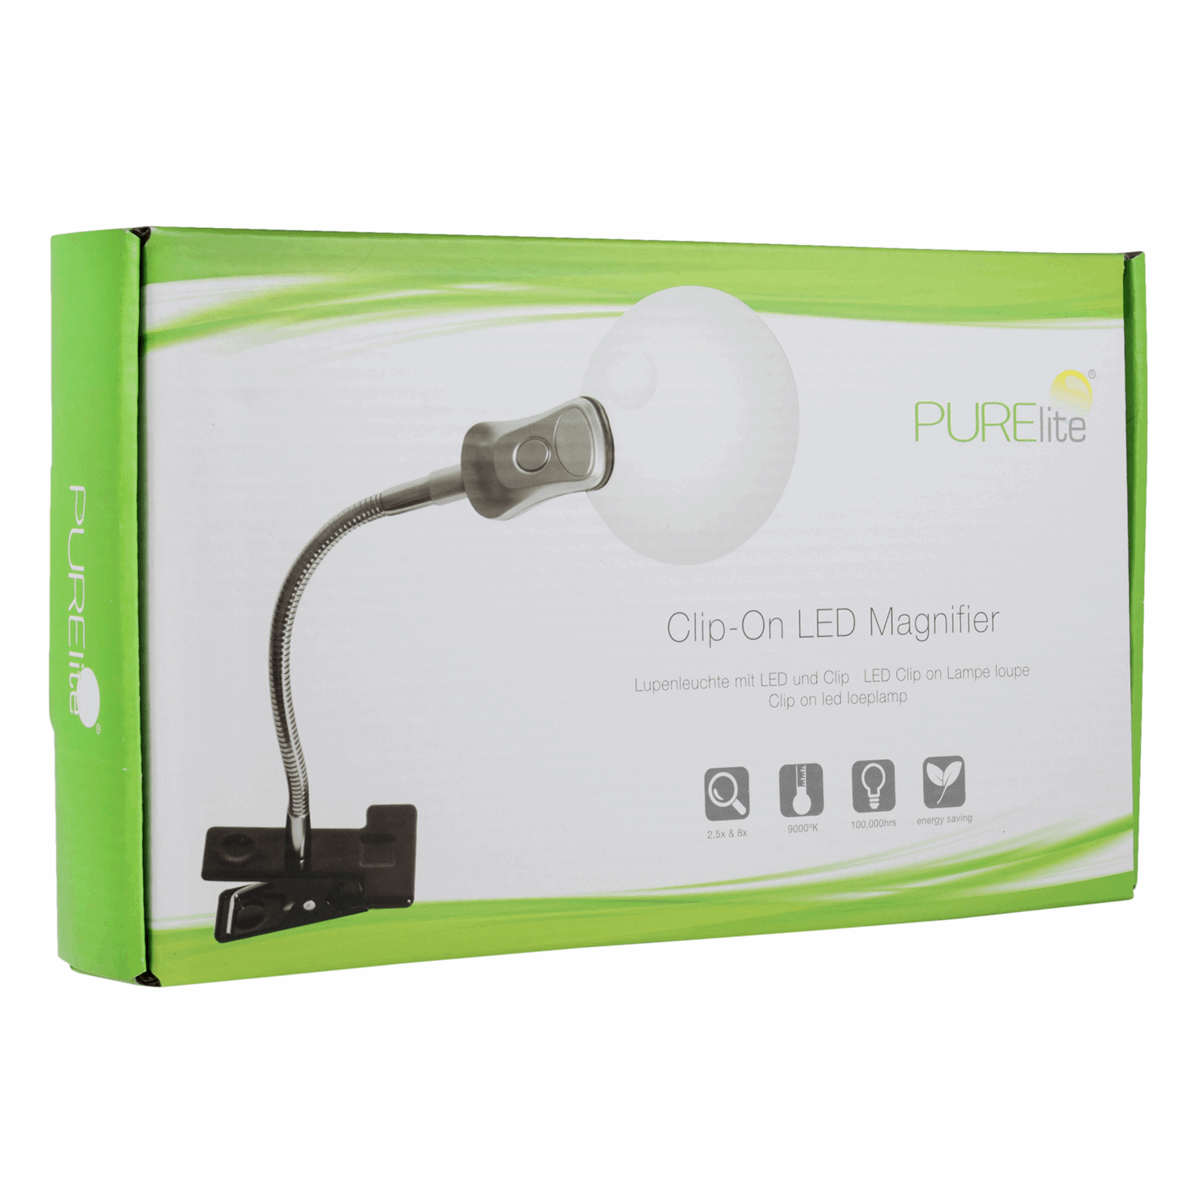 PURElite Magnifying Clip-on LED Lamp with flexible arm